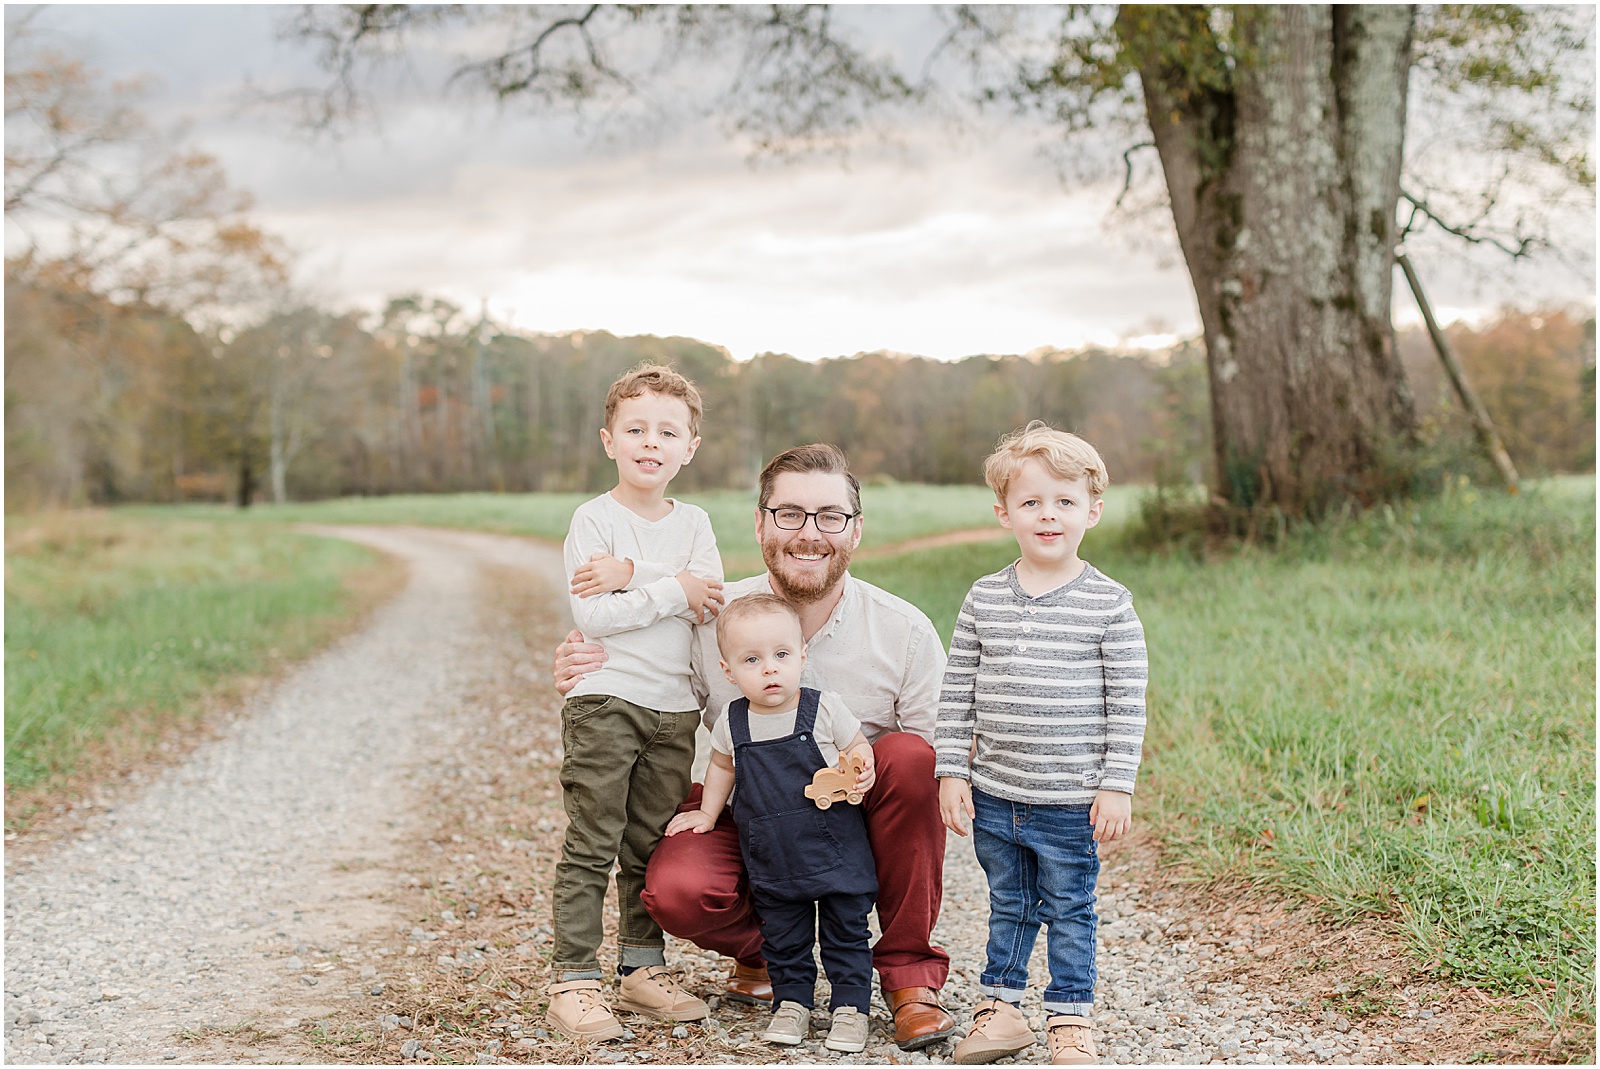 Cumming Family Photography, natural family photos, fall family photos, North Georgia photographer, North Atlanta Photographer, Cumming Georgia Photographer